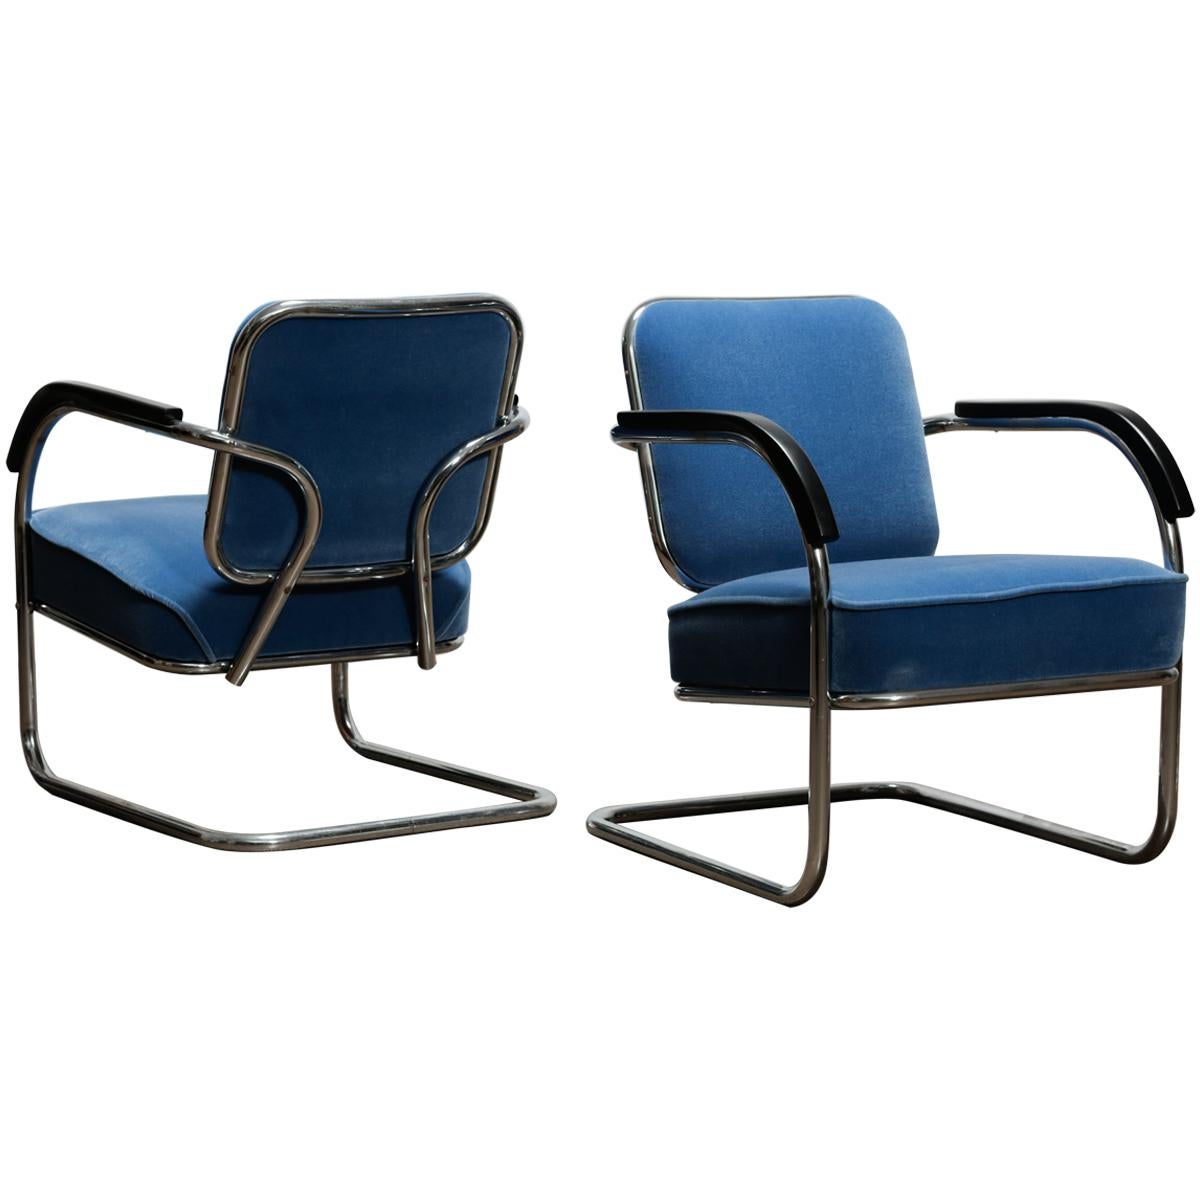 A Pair of Midcentury Cantilever Tubular Steel Armchairs with Mohair Upholstery